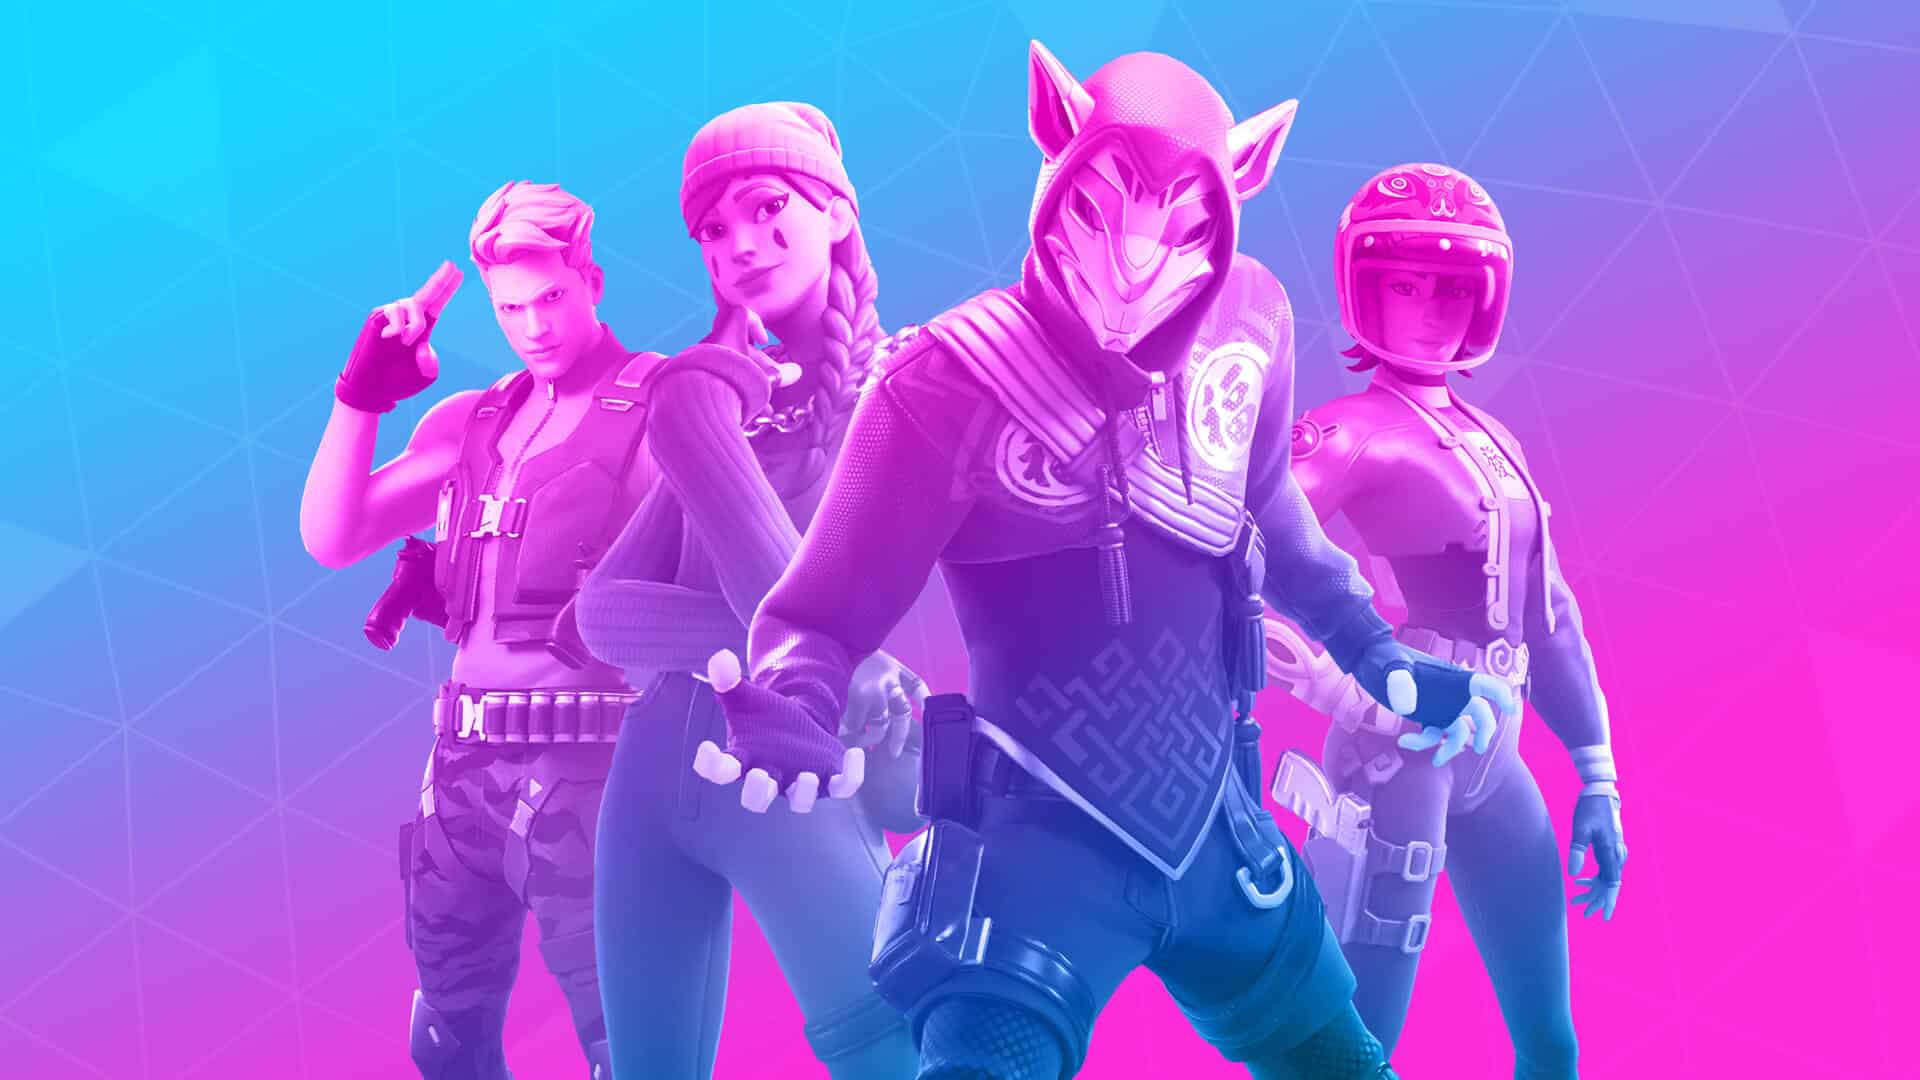 FortniteEsports news updated chapter 2 season 2 cash cup rules 12BR Competitive CashCup NewsHeader 1920x1080 d98f5c395dee56ed2d12a9ddda698acc1822ad4f